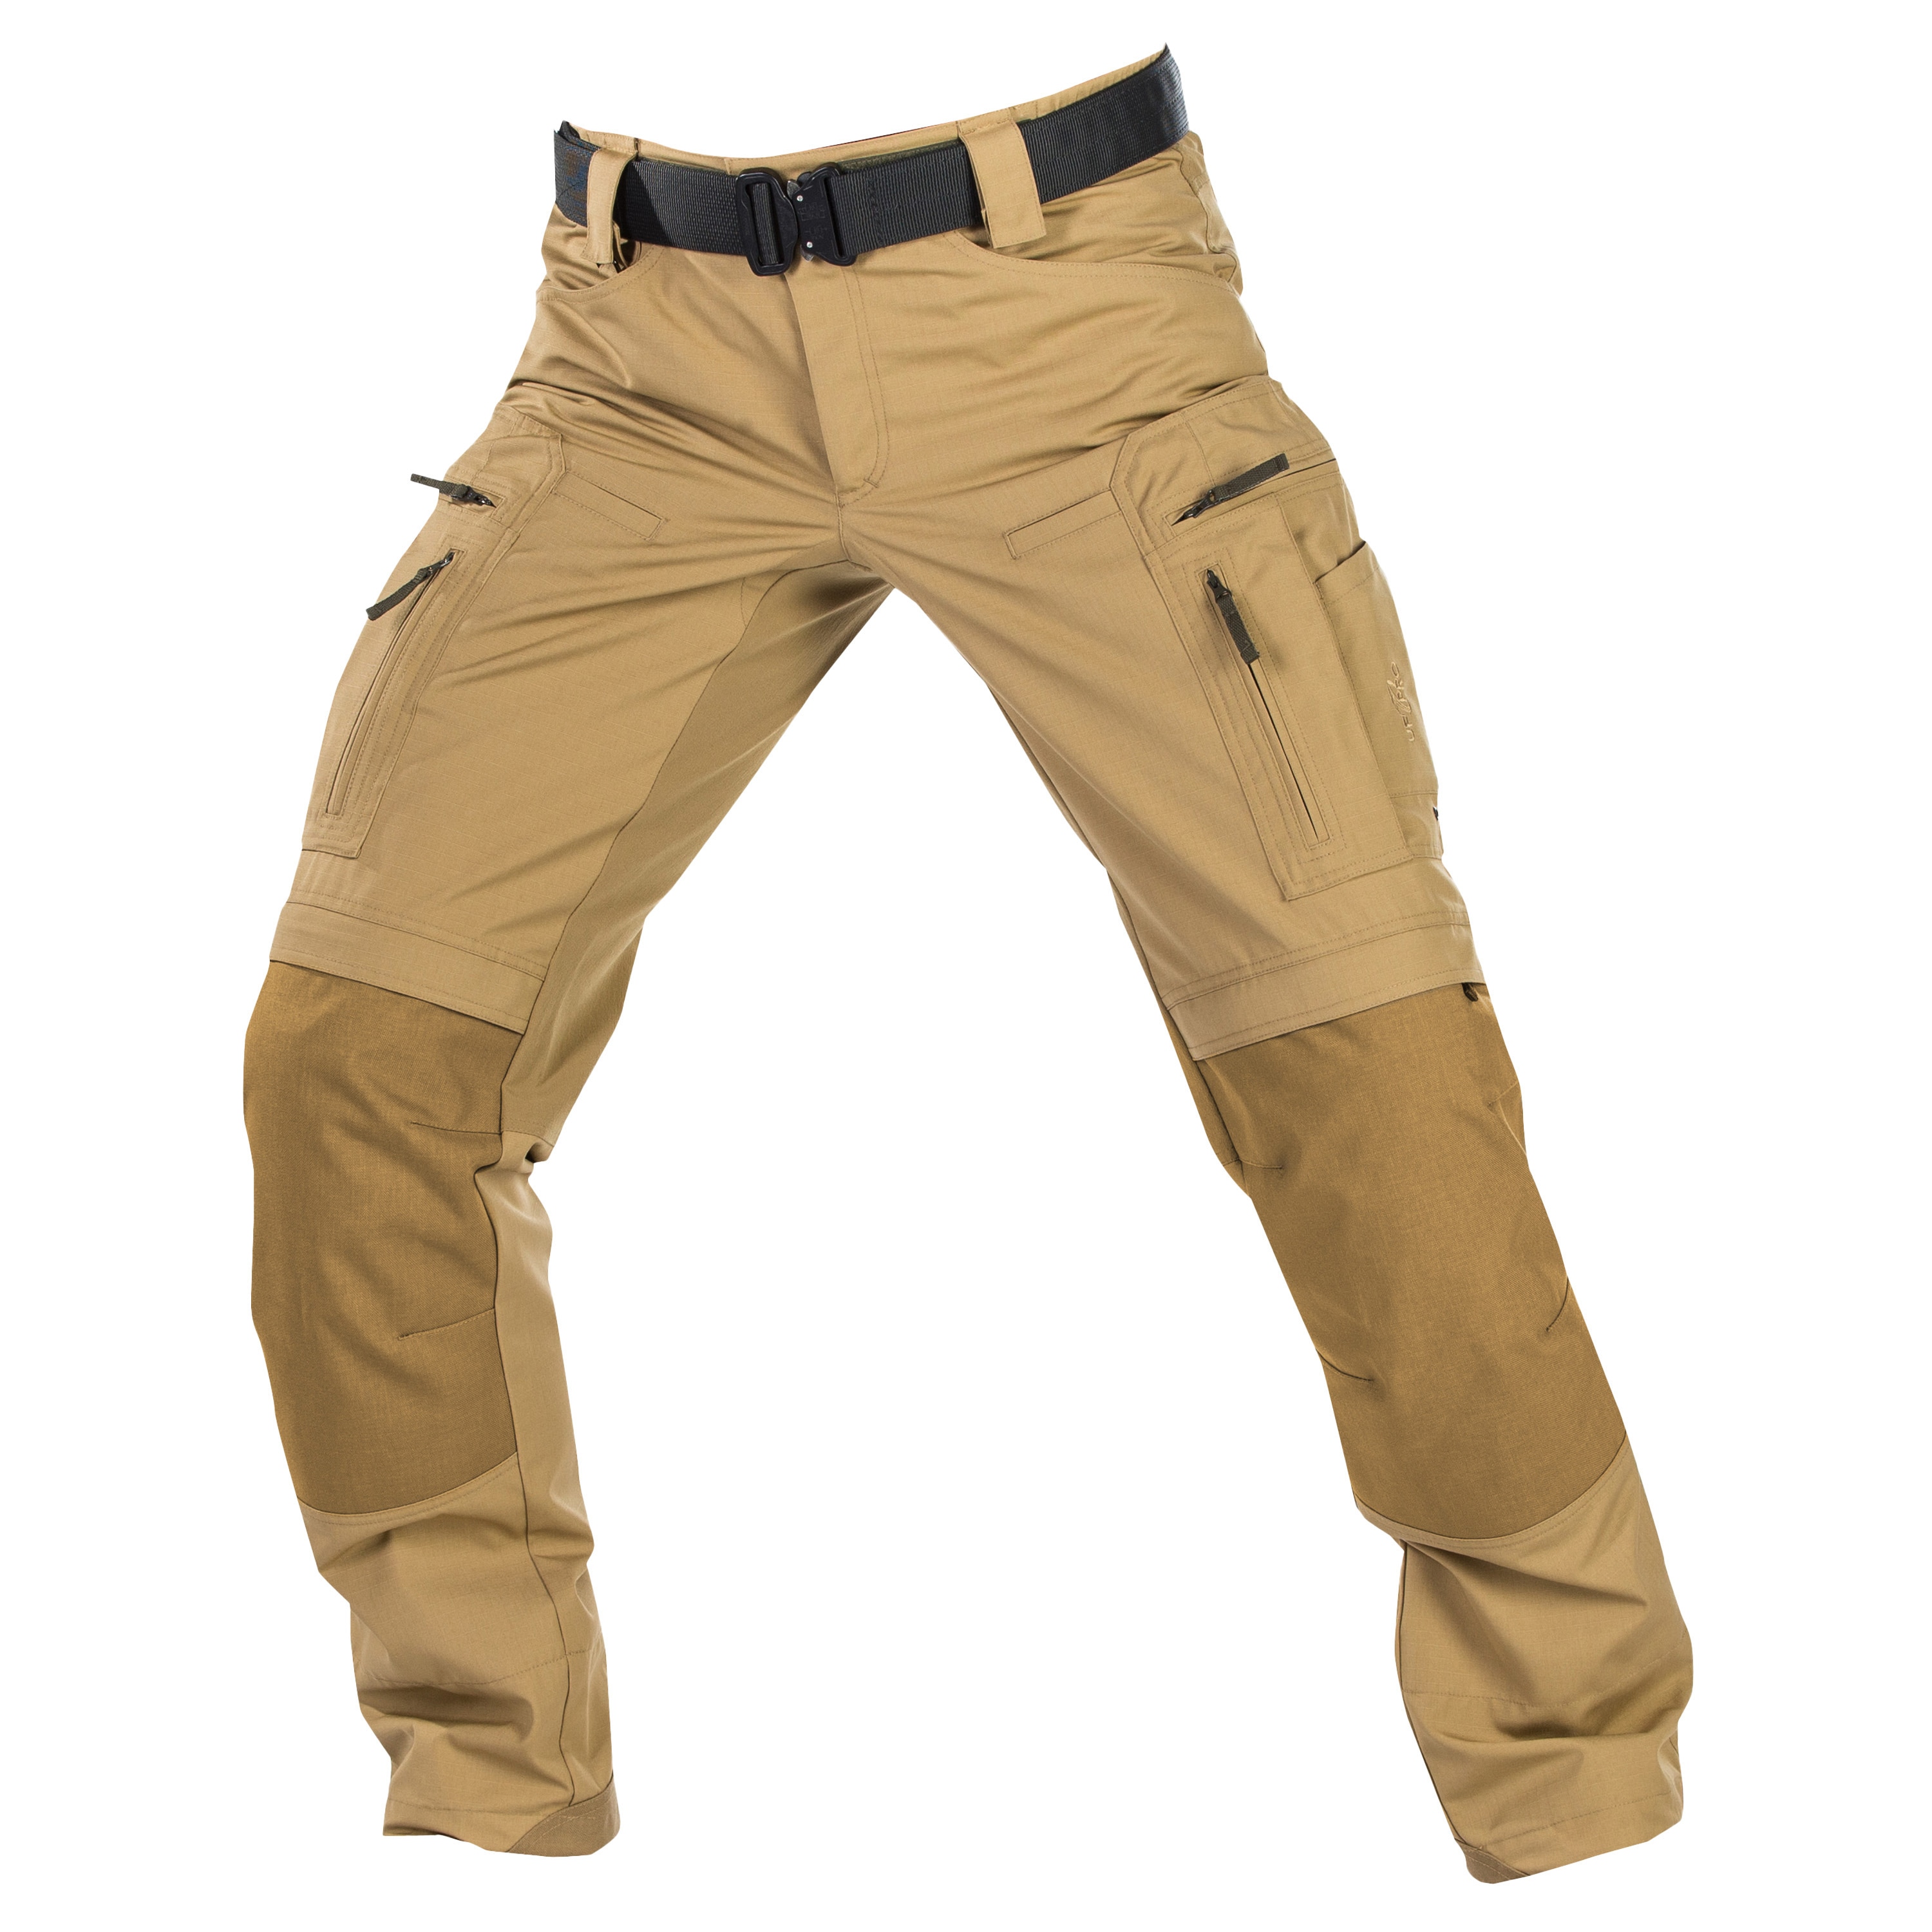 Purchase the Pants UF Pro P-40 All-Terrain coyote brown by ASMC